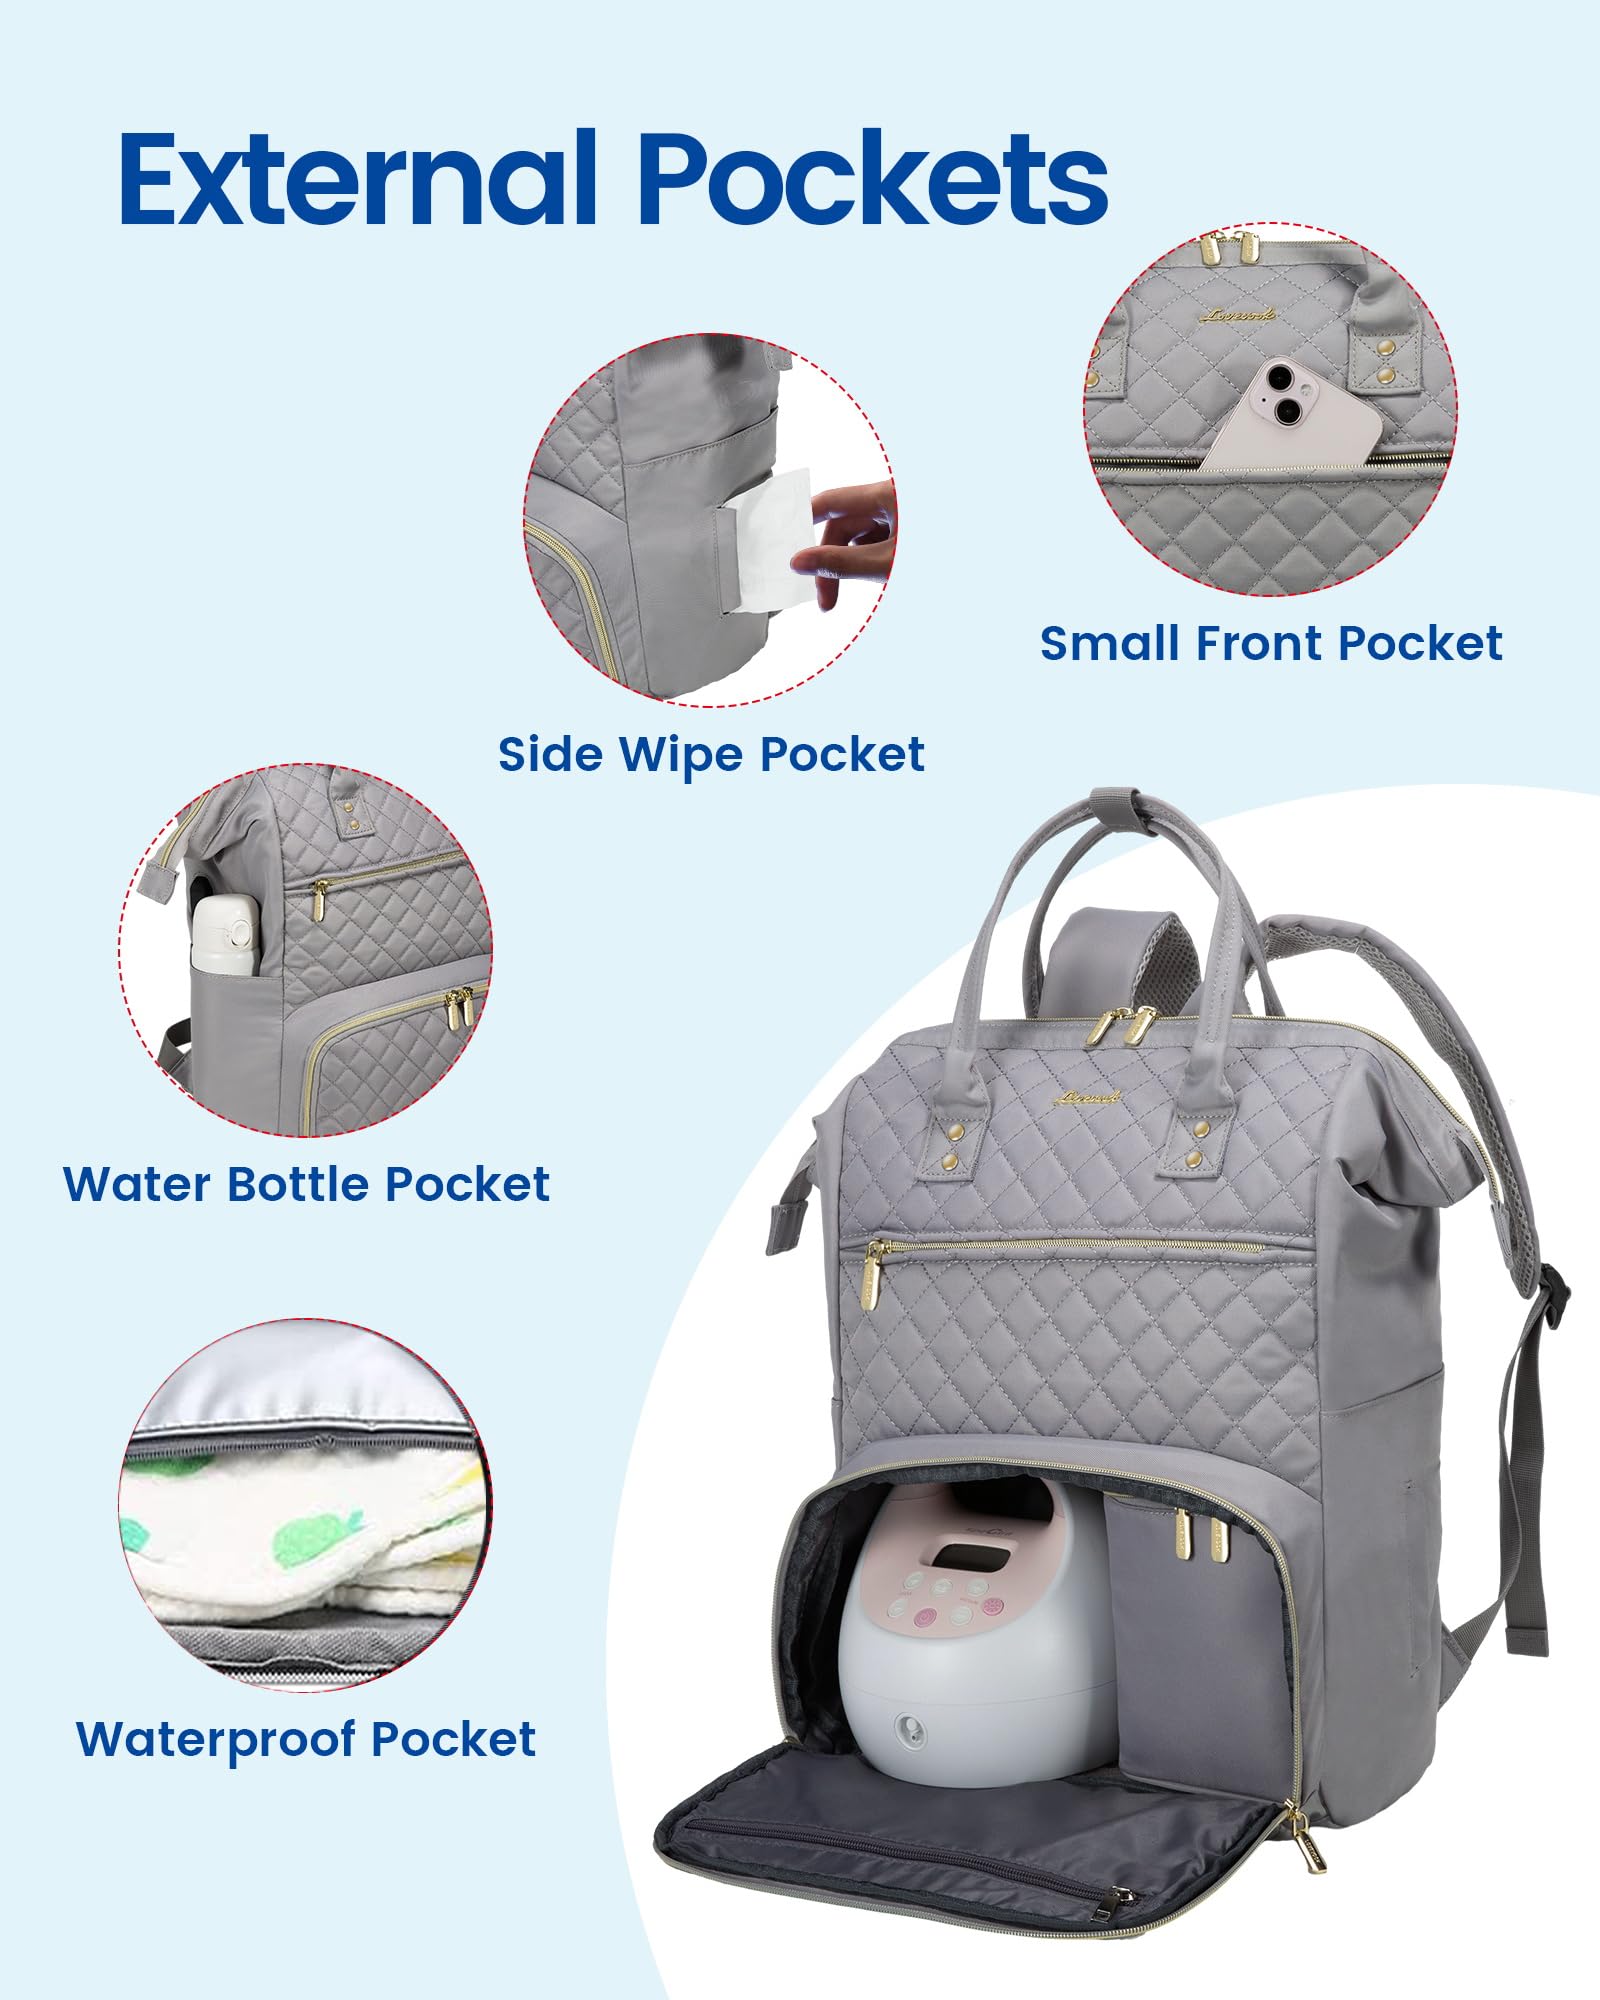 LOVEVOOK Breast Pump Backpack with Cooler Bag, Quilted Breast Pump Bags Fits Spectra S1, S2 Medela, Travel Double Layer Pumping Bag for Working Moms with 15.6" Laptop Pocket, Grey